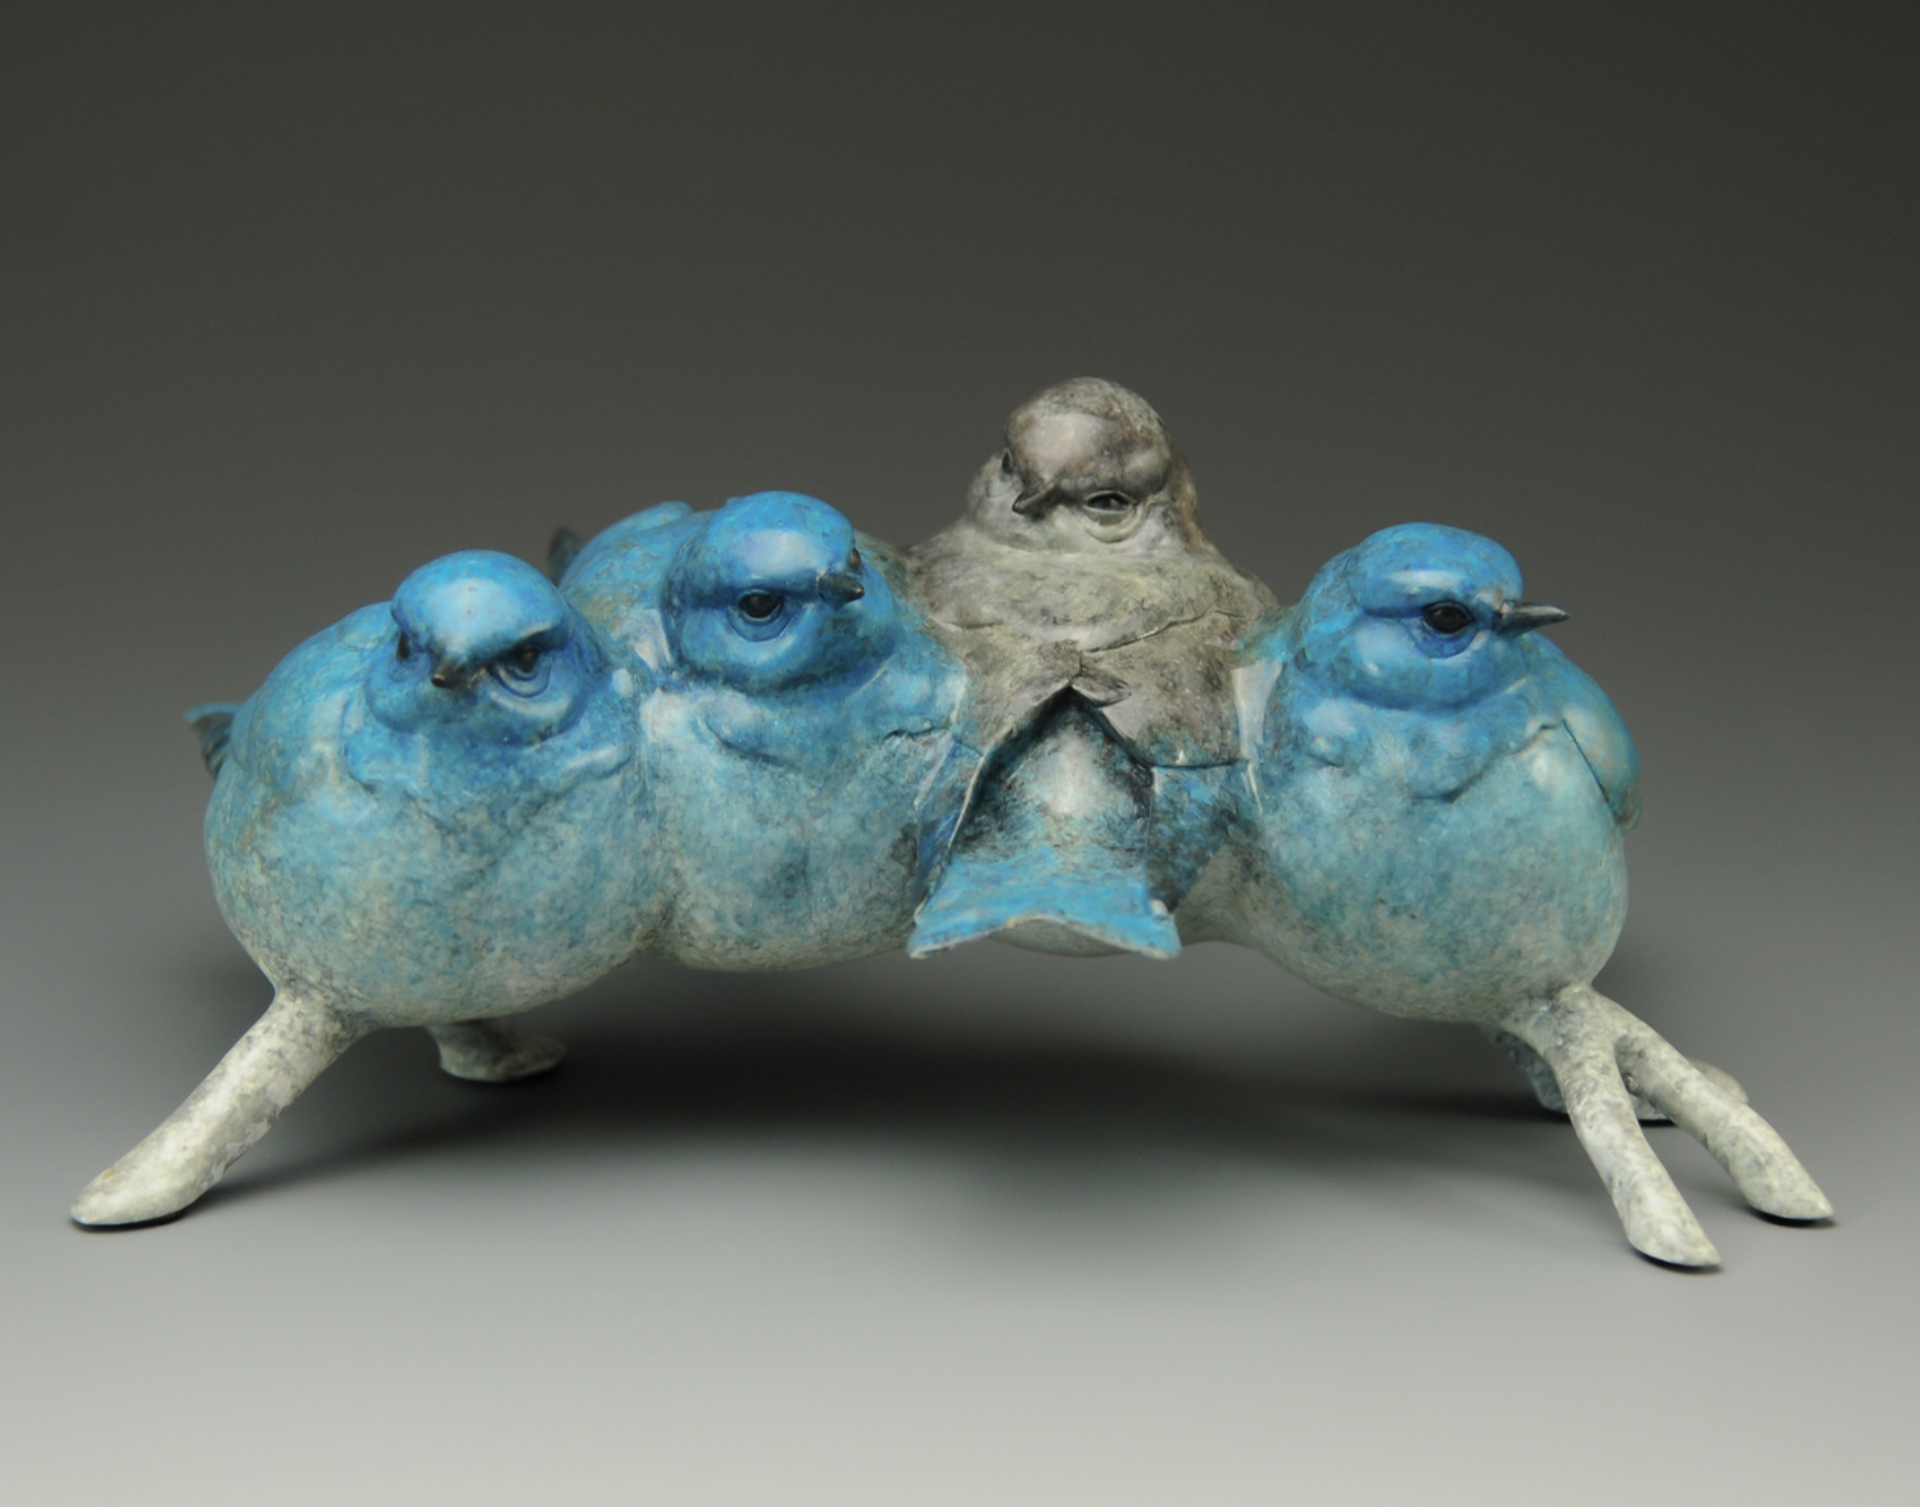 A Contemporary Bronze Of Four Bluebirds Balancing On A Branch In The Winter At Gallery Wild